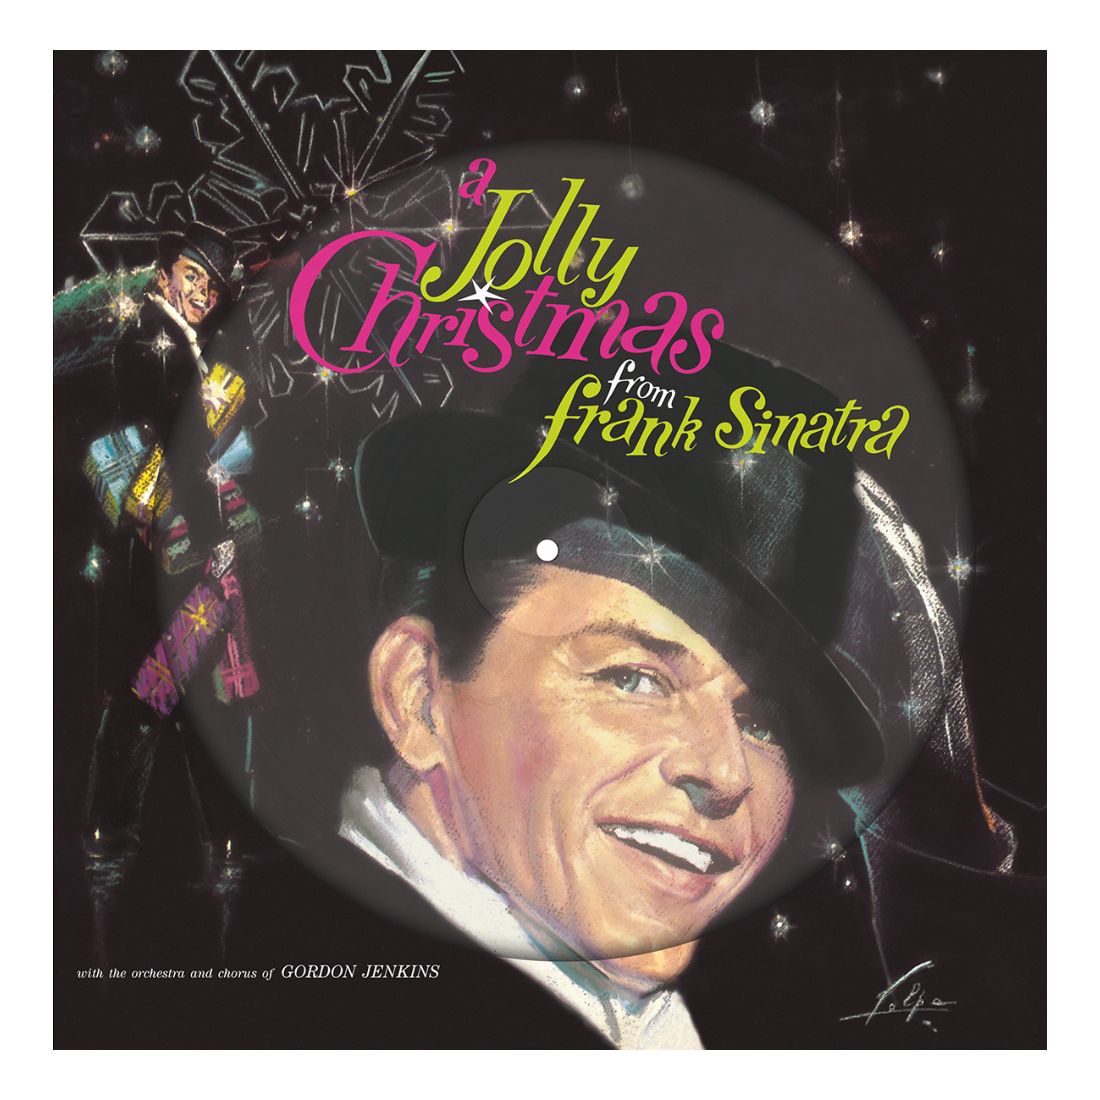 Виниловая пластинка A Jolly Christmas from Frank Sinatra (Picture Disc) | Frank Sinatra universal frank sinatra a jolly christmas from frank sinatra виниловая пластинка